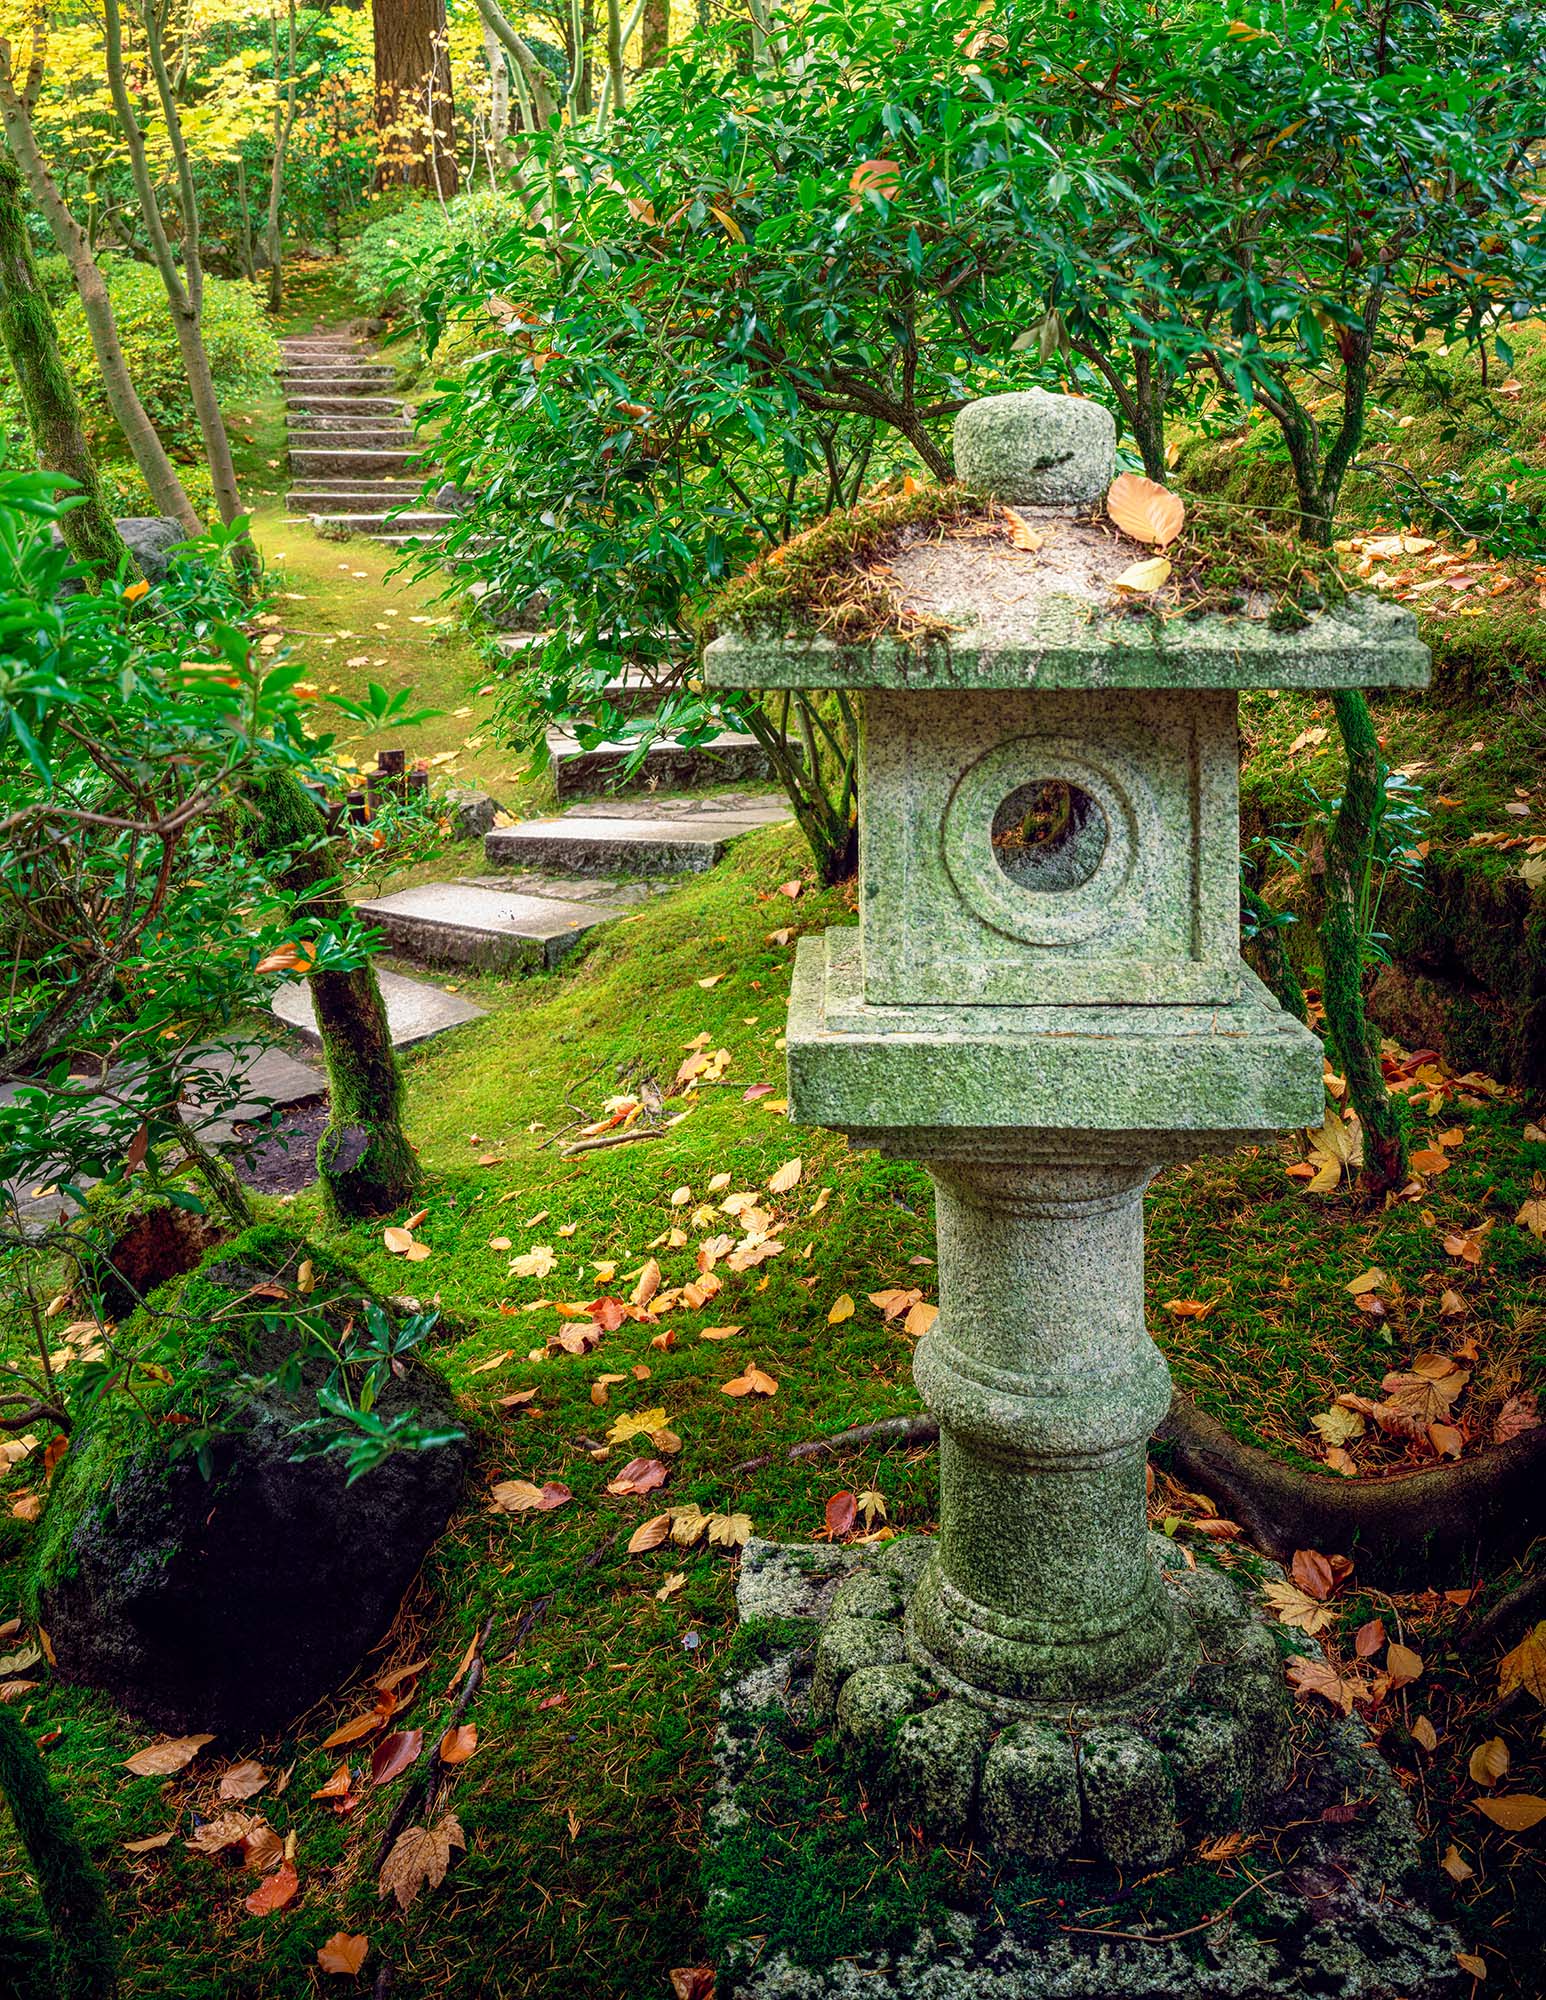 In this tranquil image captured at the Portland Japanese Gardens, a Japanese stone lantern stands as a guardian at the entrance...